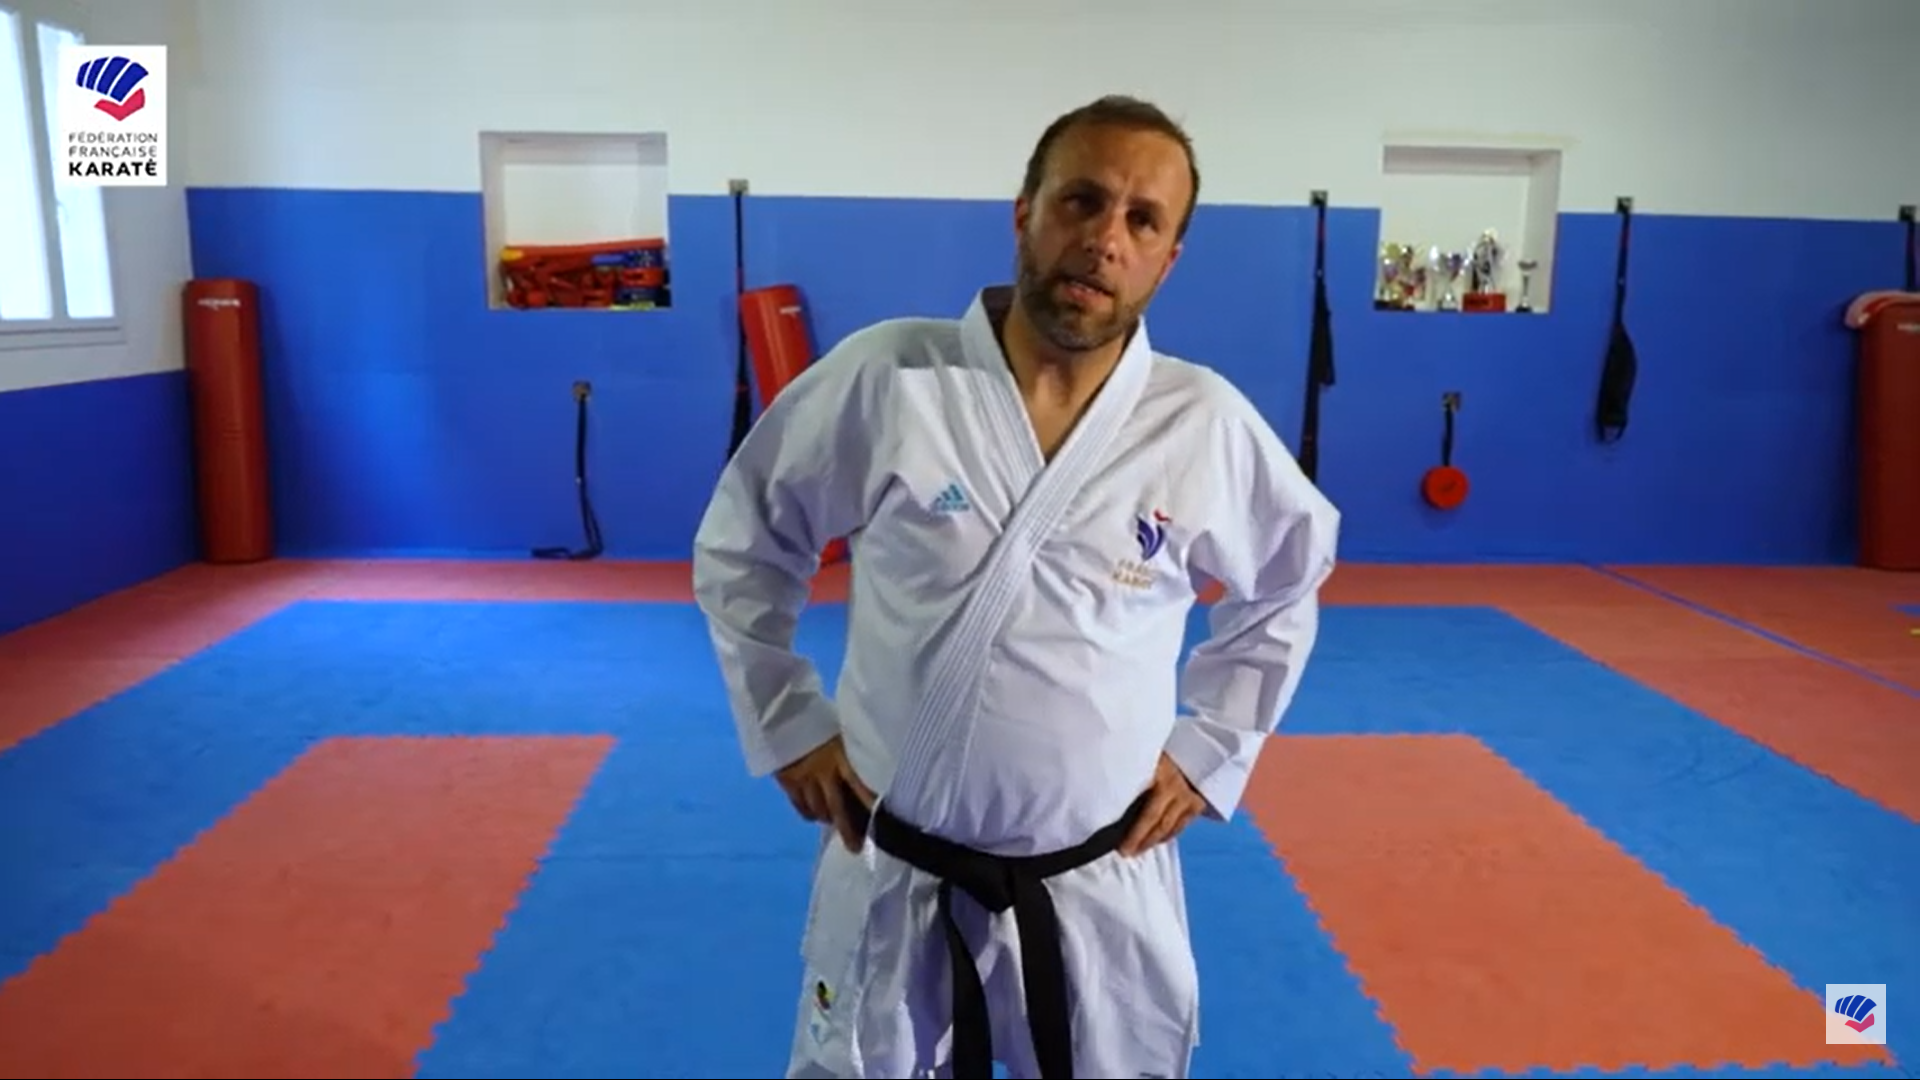 Alexandre Biamonti leads a video produced by the French Karate Federation ©YouTube